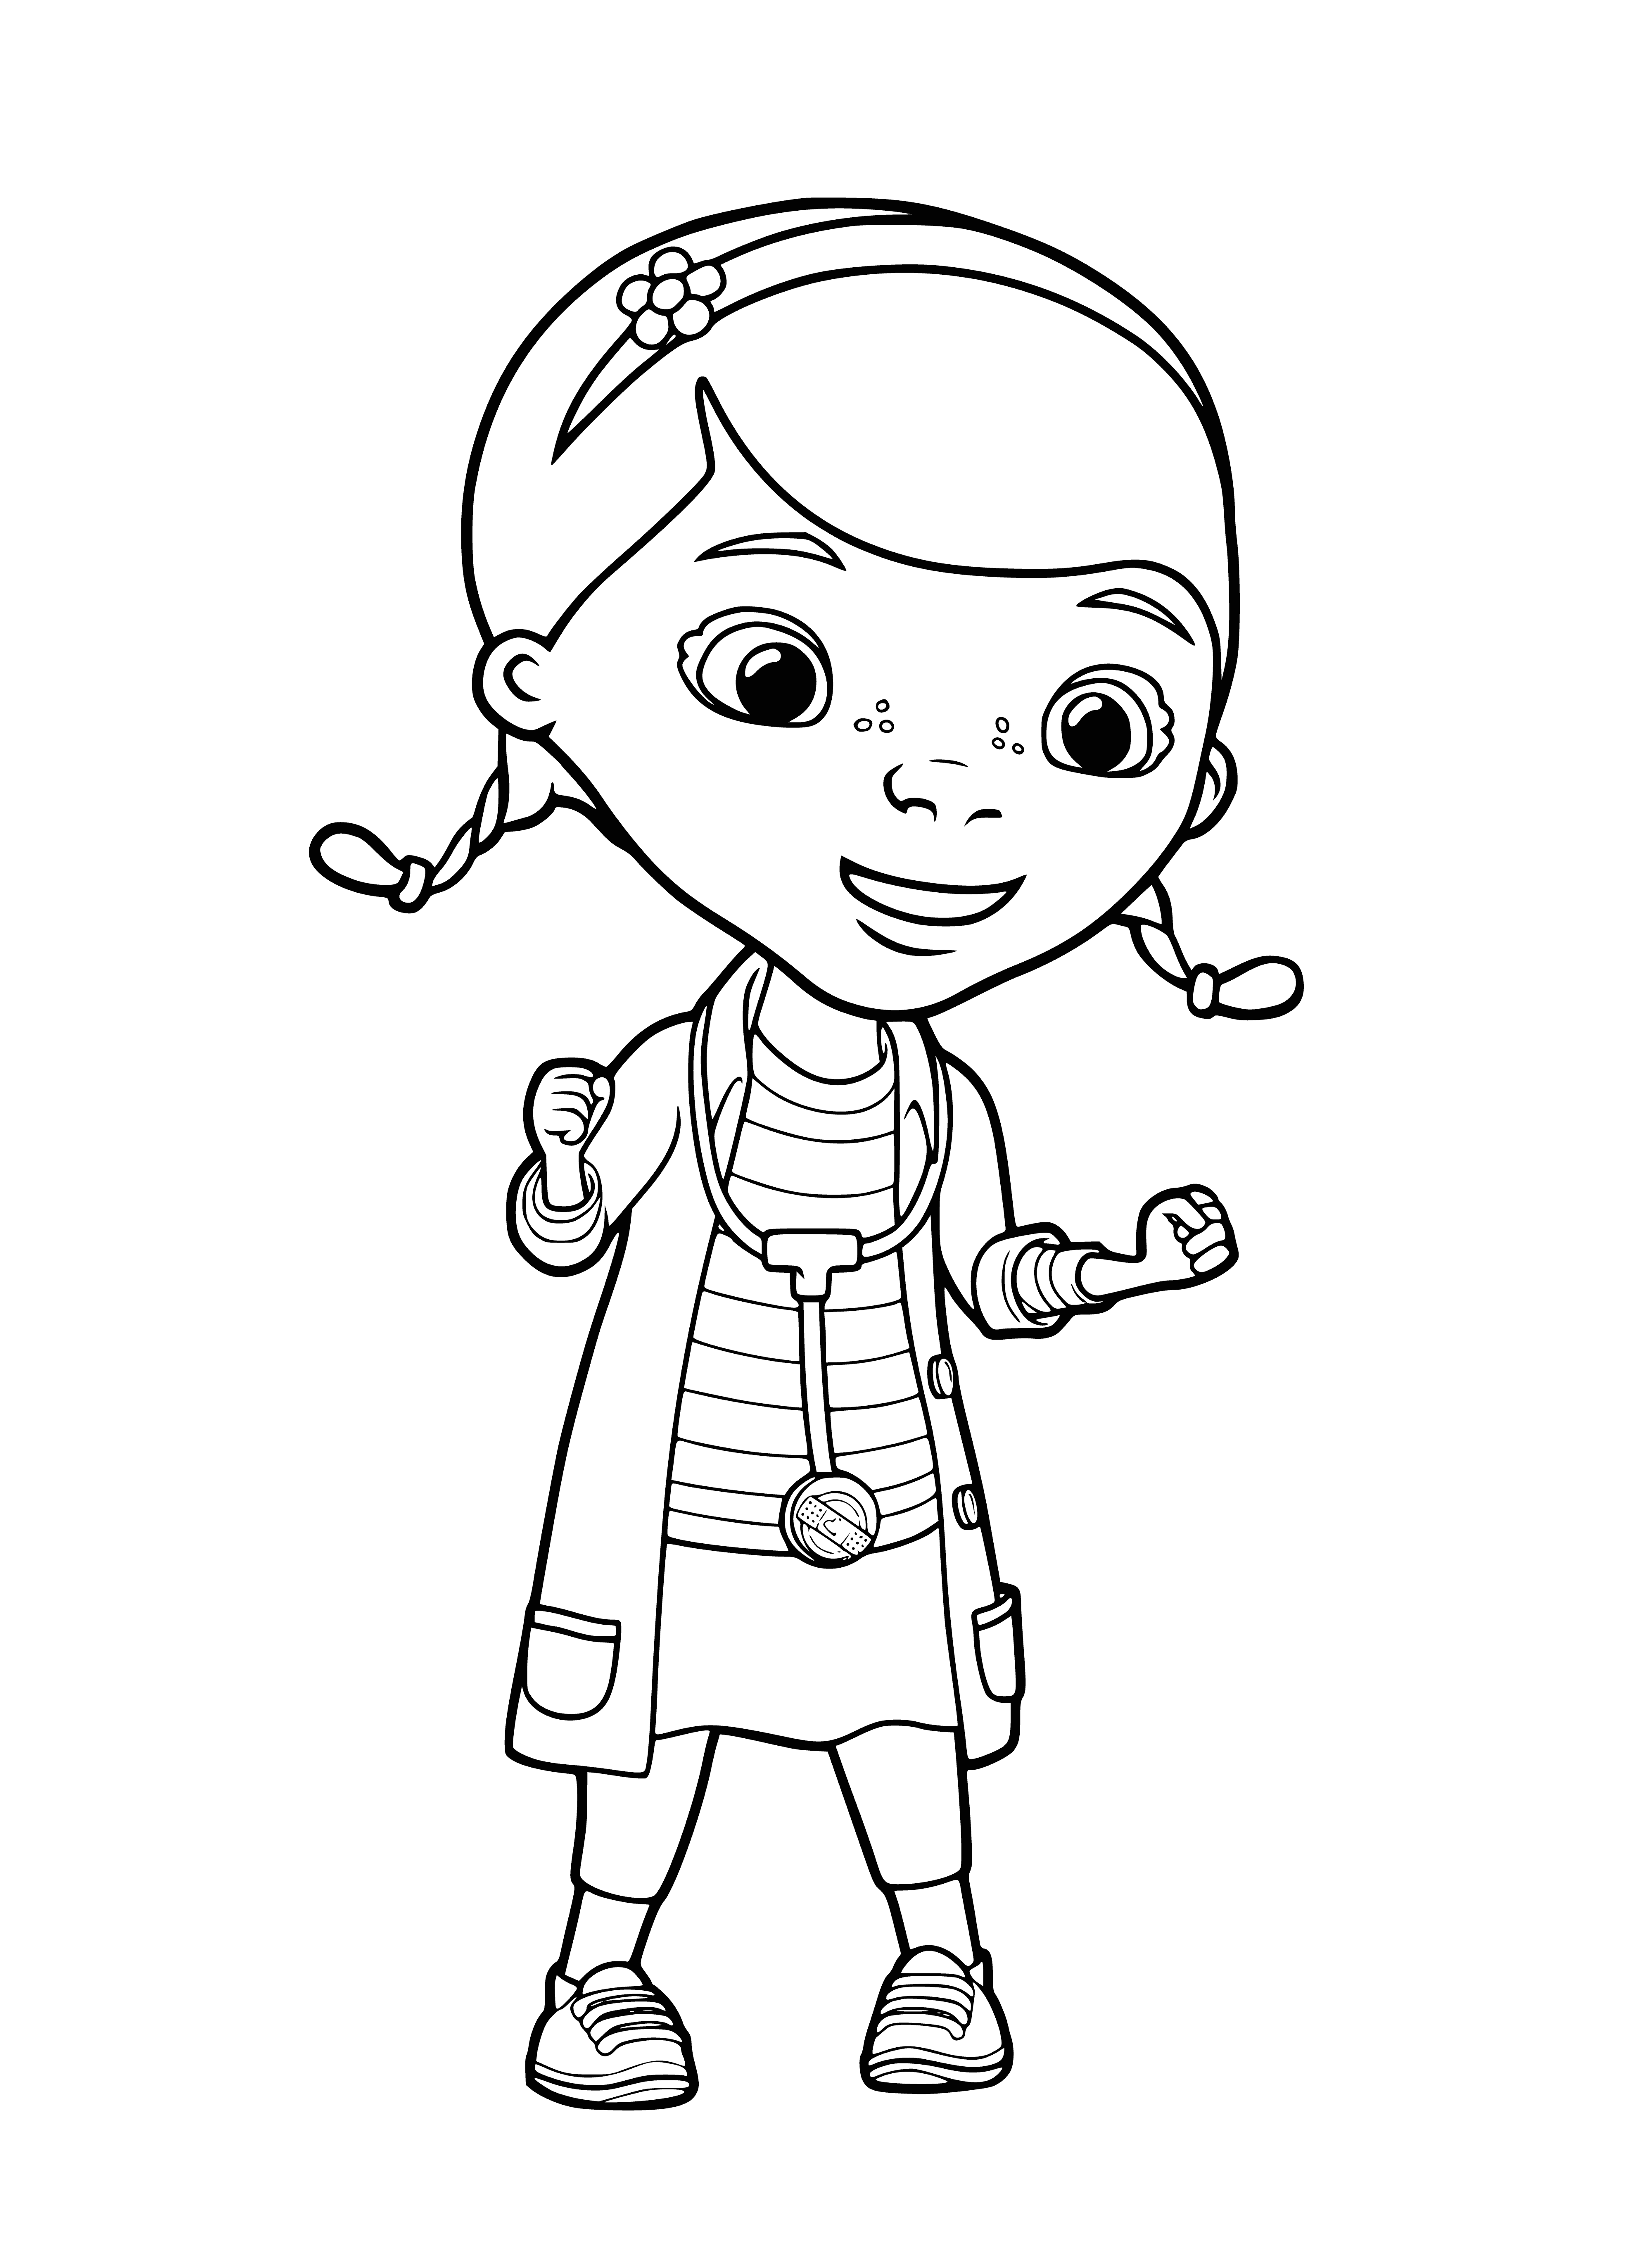 coloring page: Doctor with brown skin and curly black hair smiles, holding blue toy and wearing white coat, blue shirt, and white star headband. #diversity #empowerment